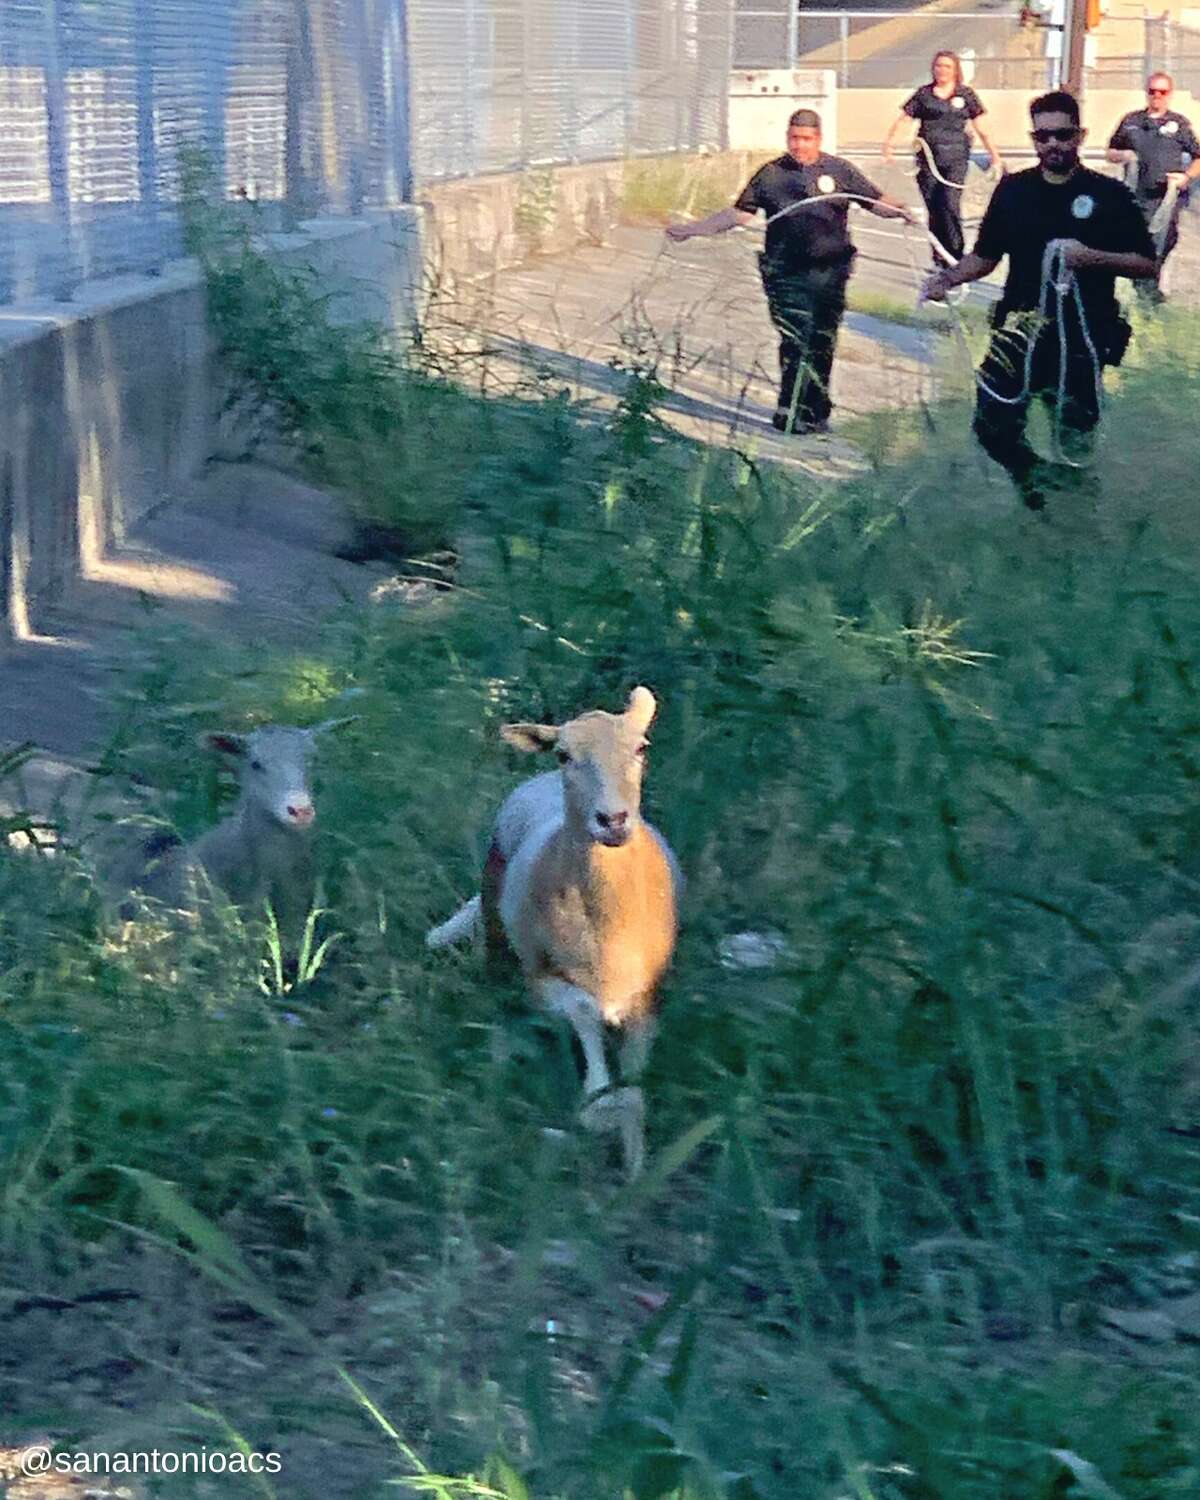 Police officers caught two sheep after chasing them near Texas 151 on the West Side earlier this year.